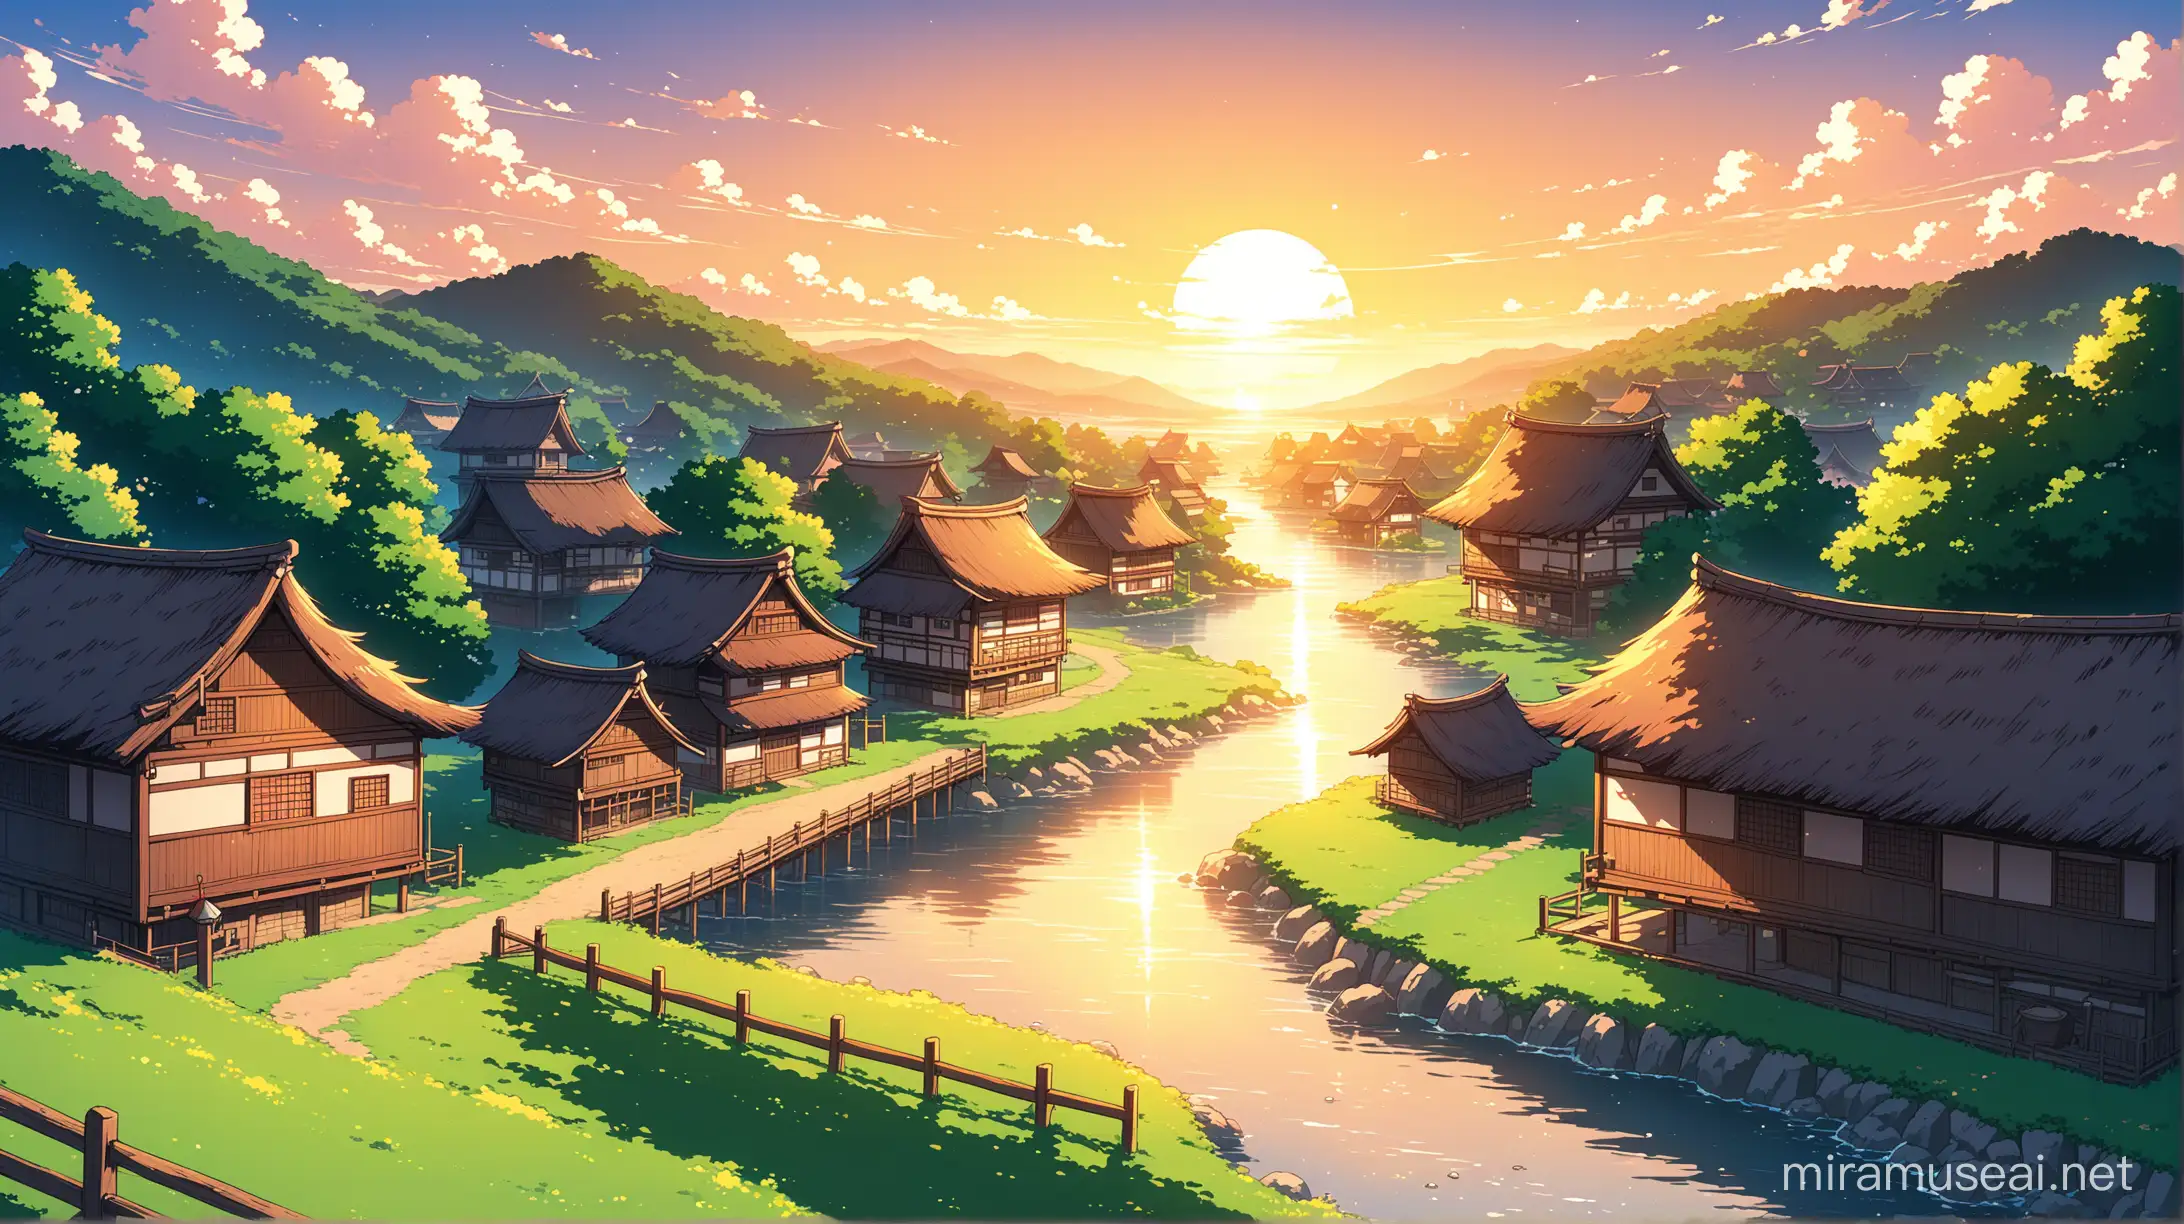 Charming AnimeStyle Village Scenery with Quaint Buildings and Lush Greenery